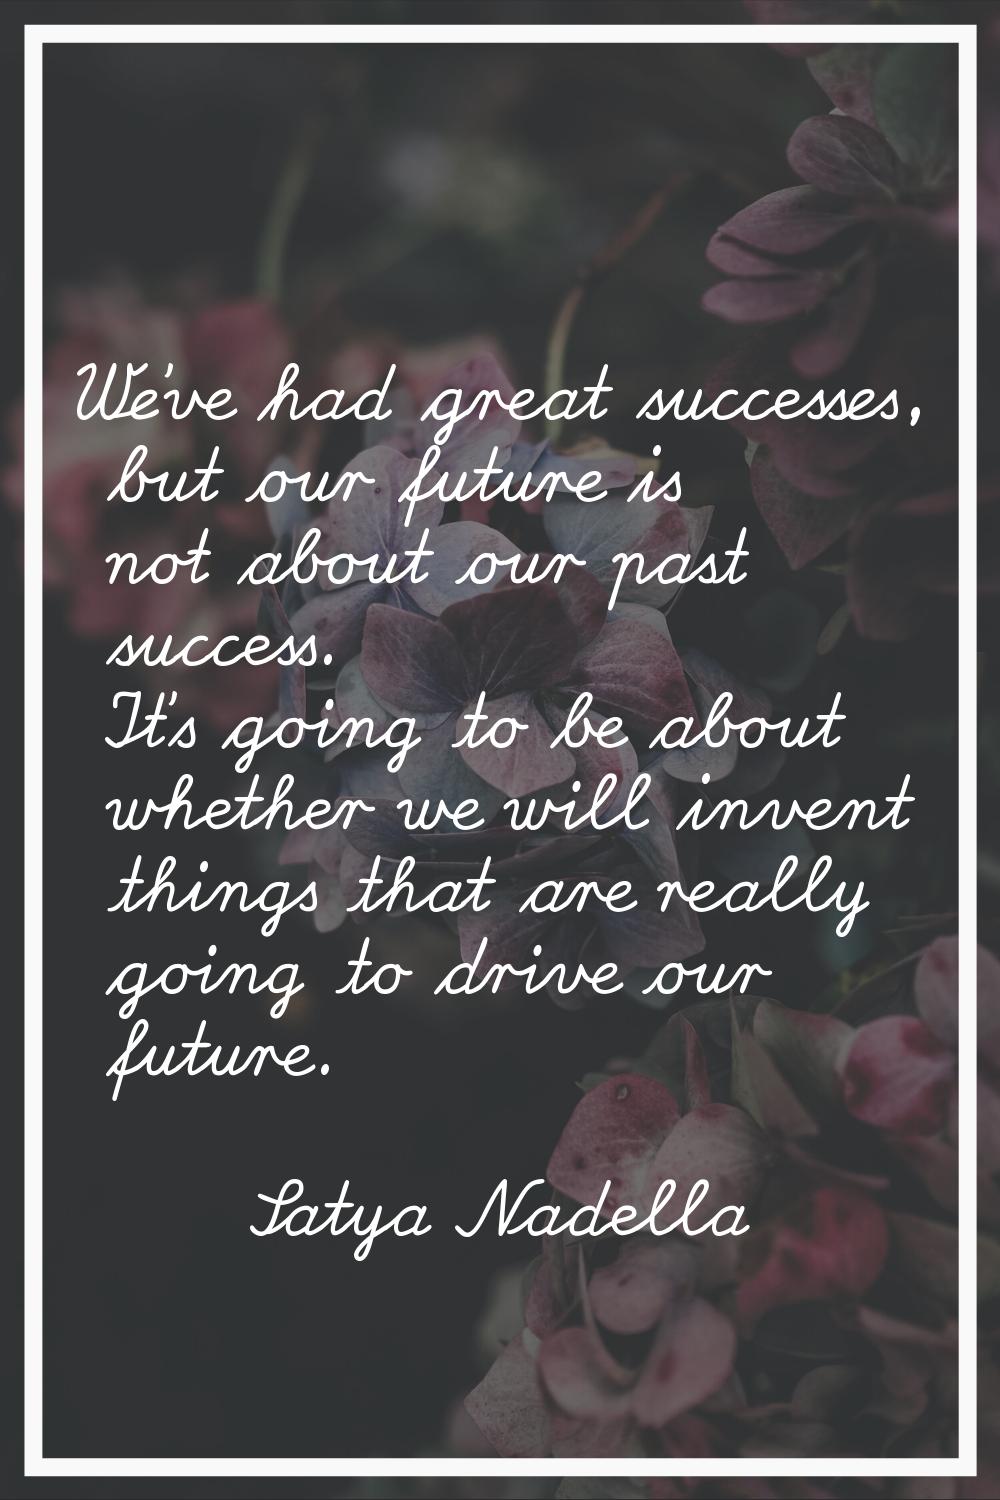 We've had great successes, but our future is not about our past success. It's going to be about whe